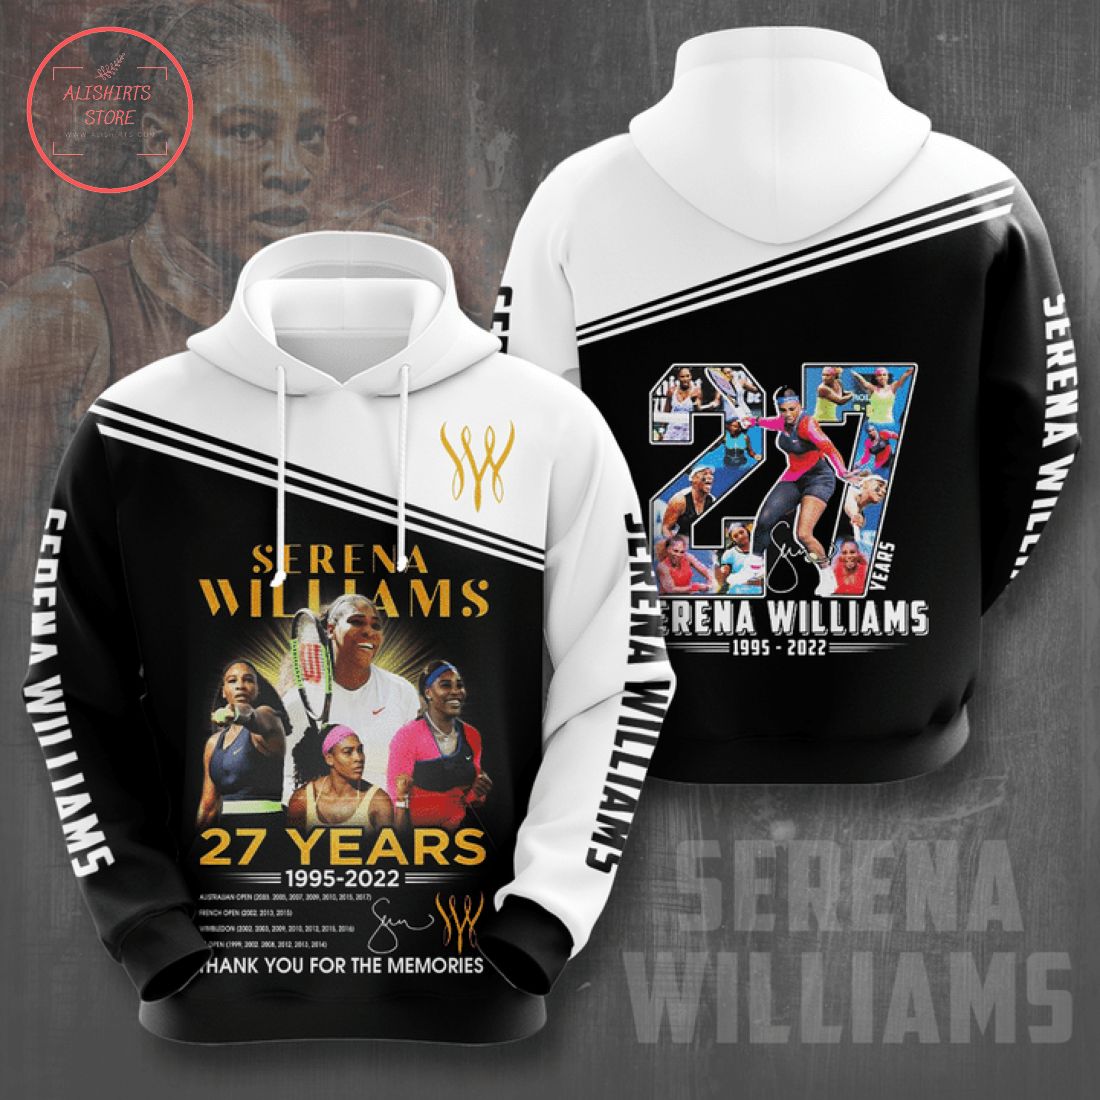 Serena Williams 27 years 1995 2022 Thank You for the Memories Shirt